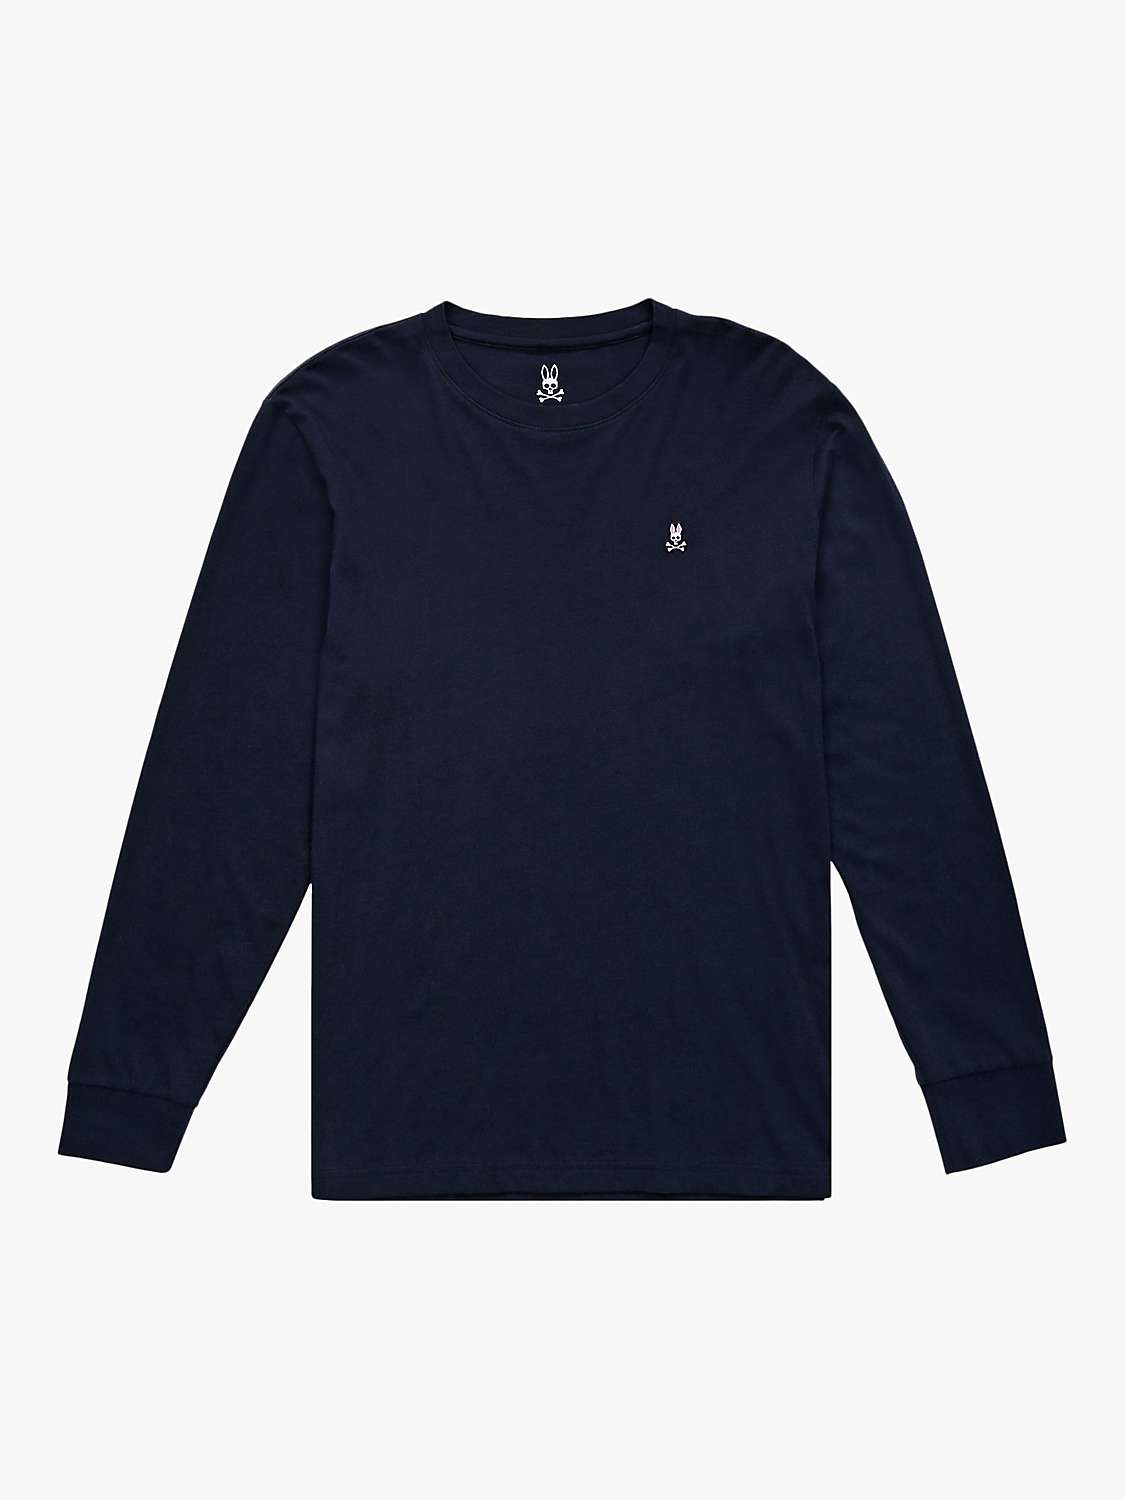 Buy Psycho Bunny Long Sleeve T-Shirt Online at johnlewis.com